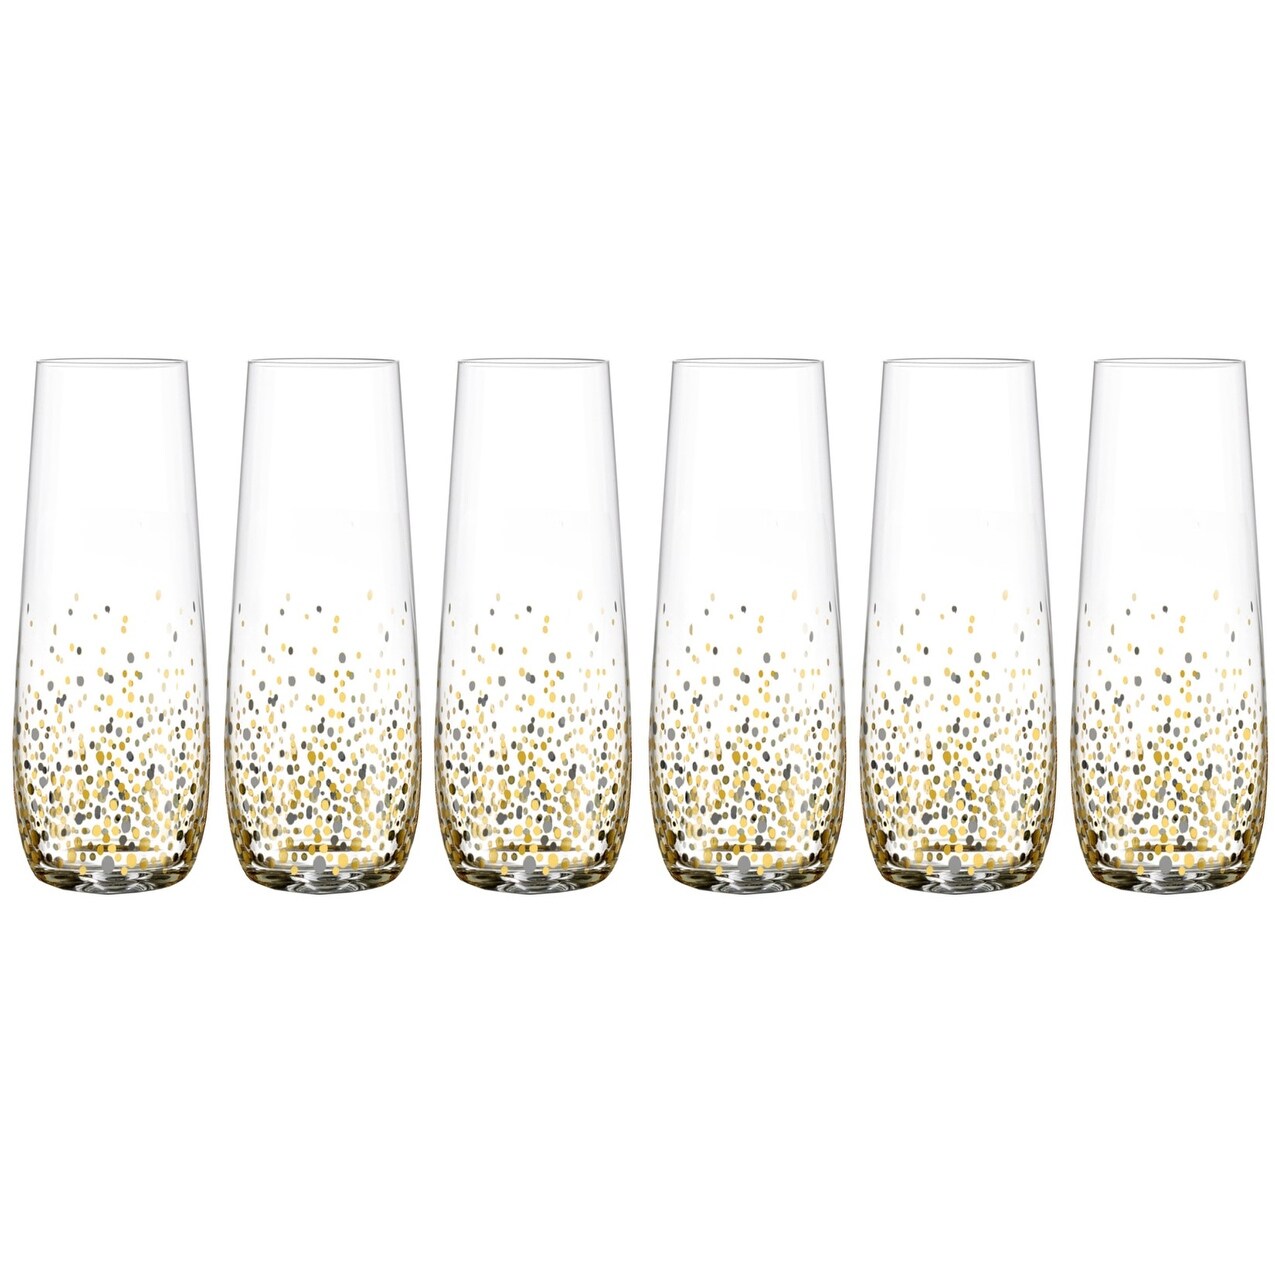 https://ak1.ostkcdn.com/images/products/is/images/direct/504981cb5d789483192d3b87f86c8175d57ff8dc/American-Atelier-Luster-Stemless-Champagne-Flute-Set-of-6.jpg